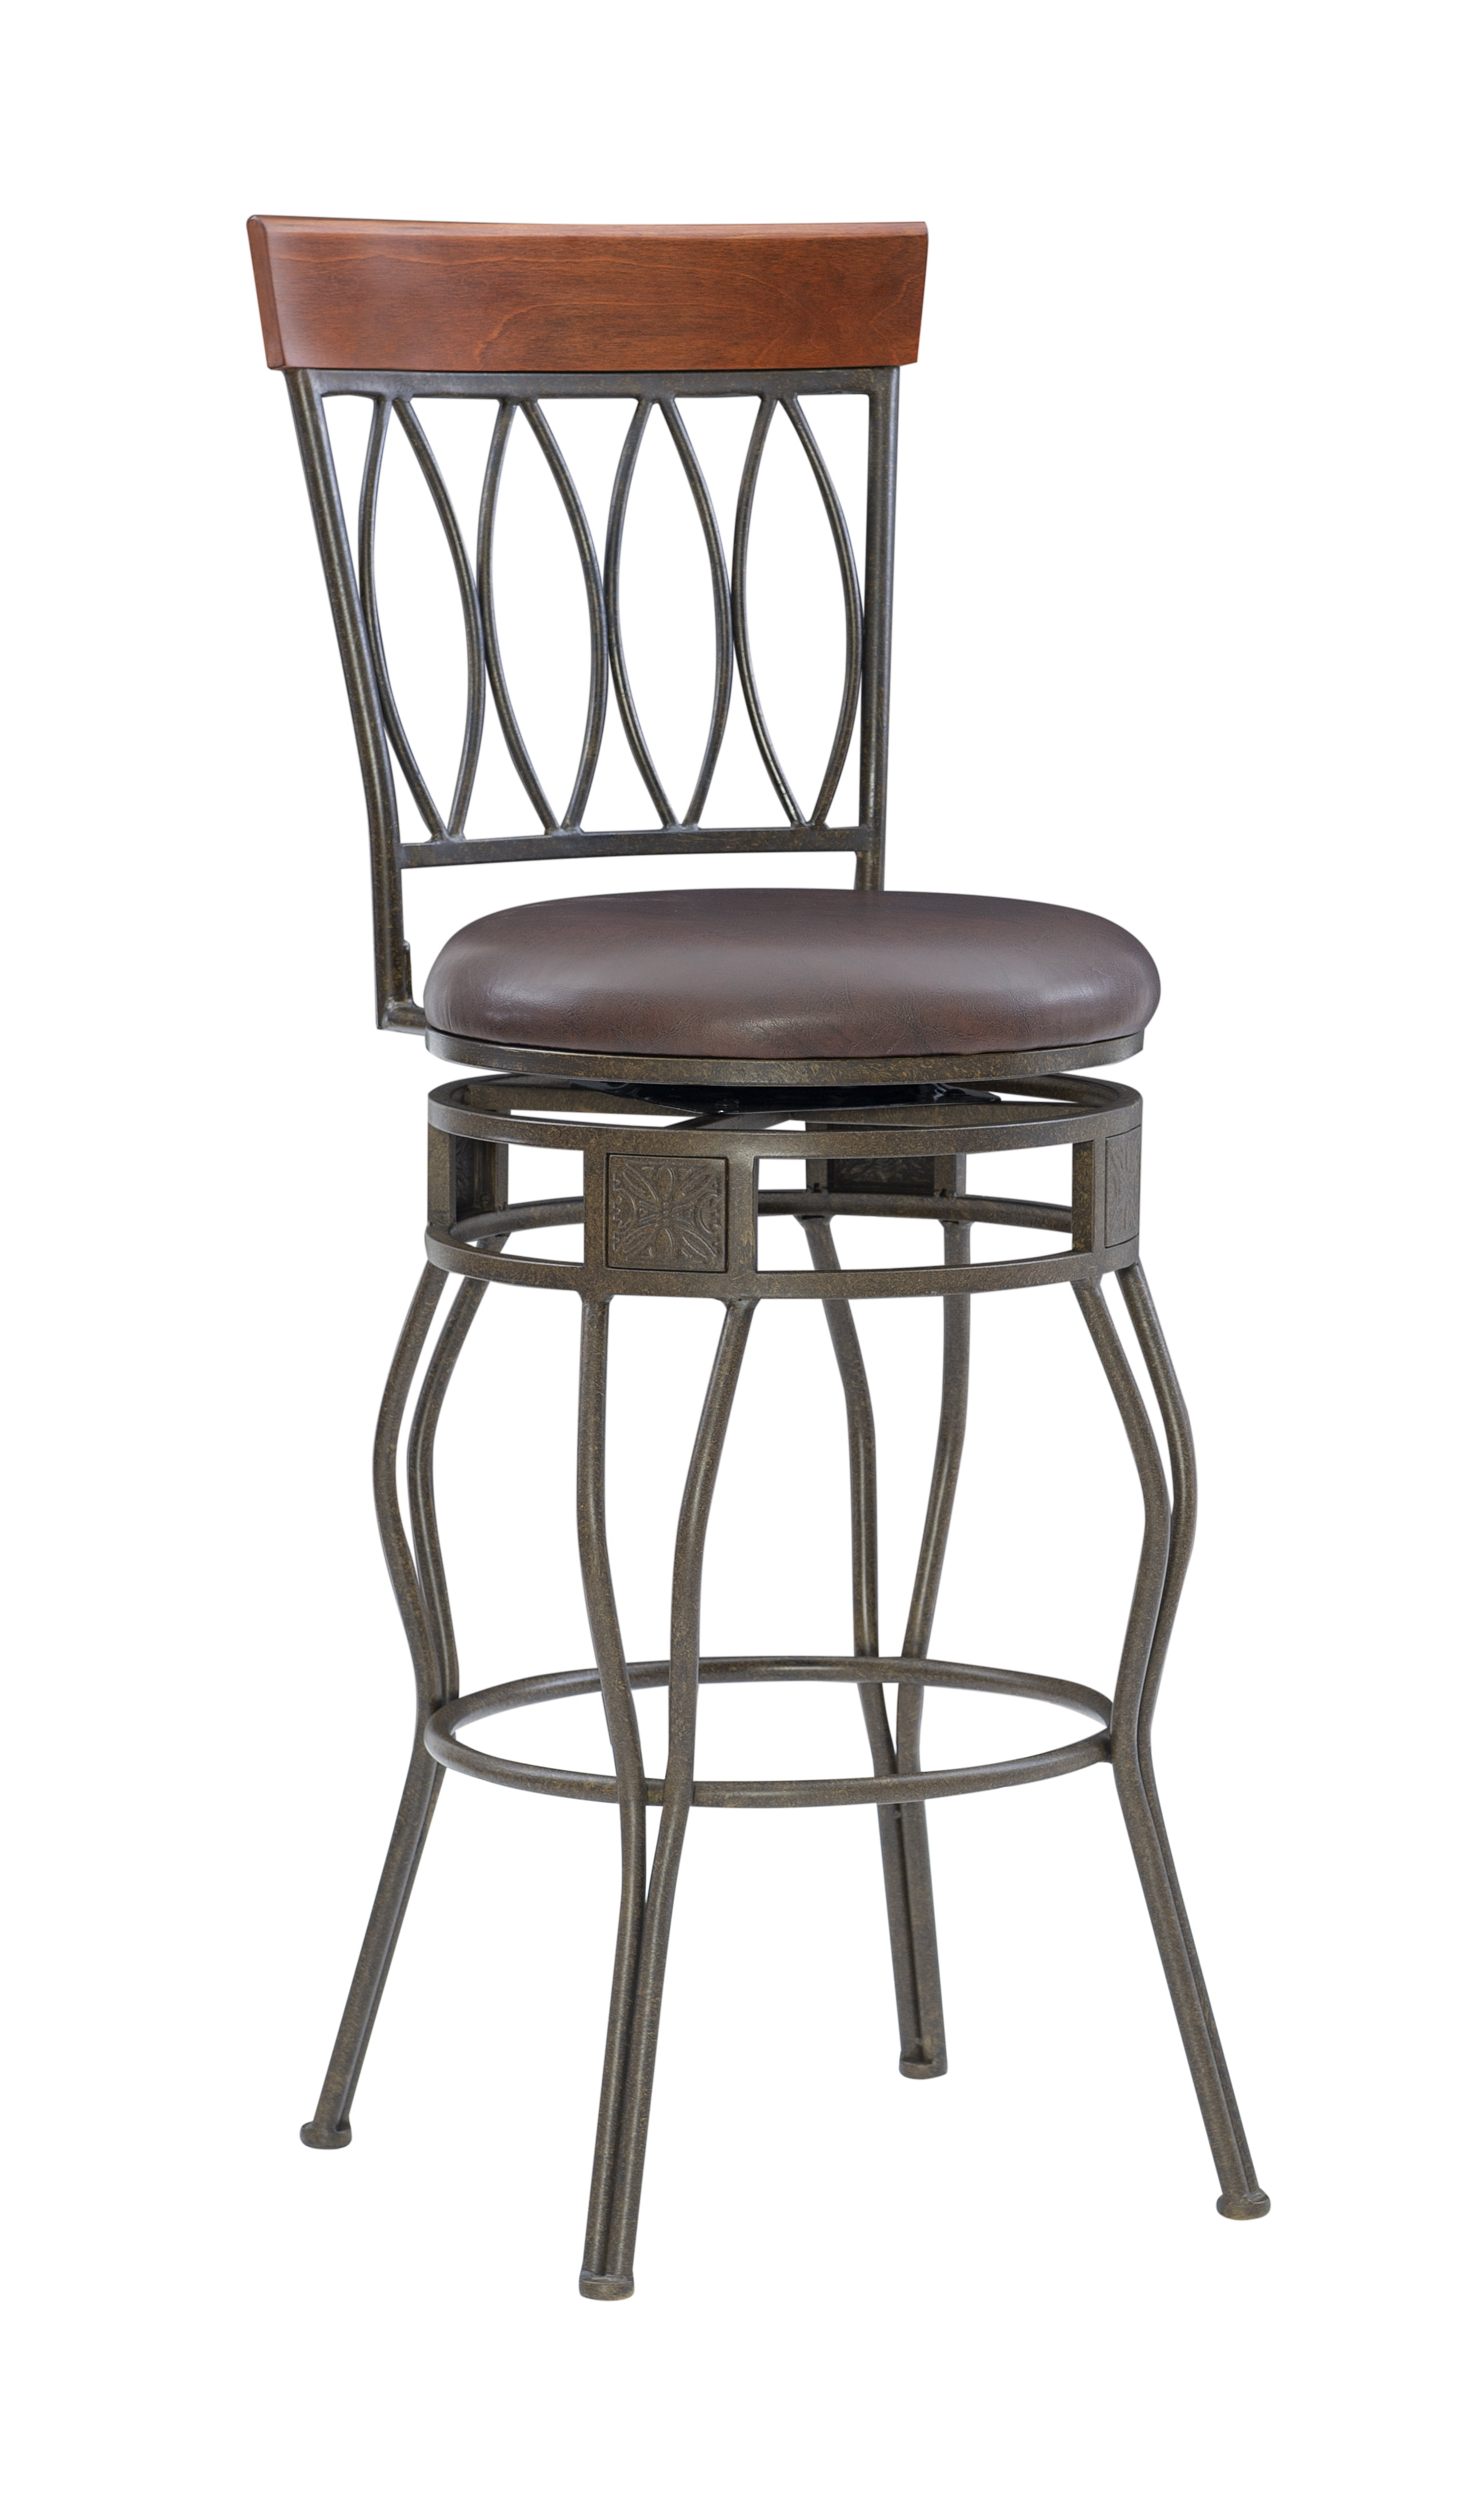 Linon Oval Back Bar Stool Brown 30, 30 Inch Wooden Bar Stools With Back